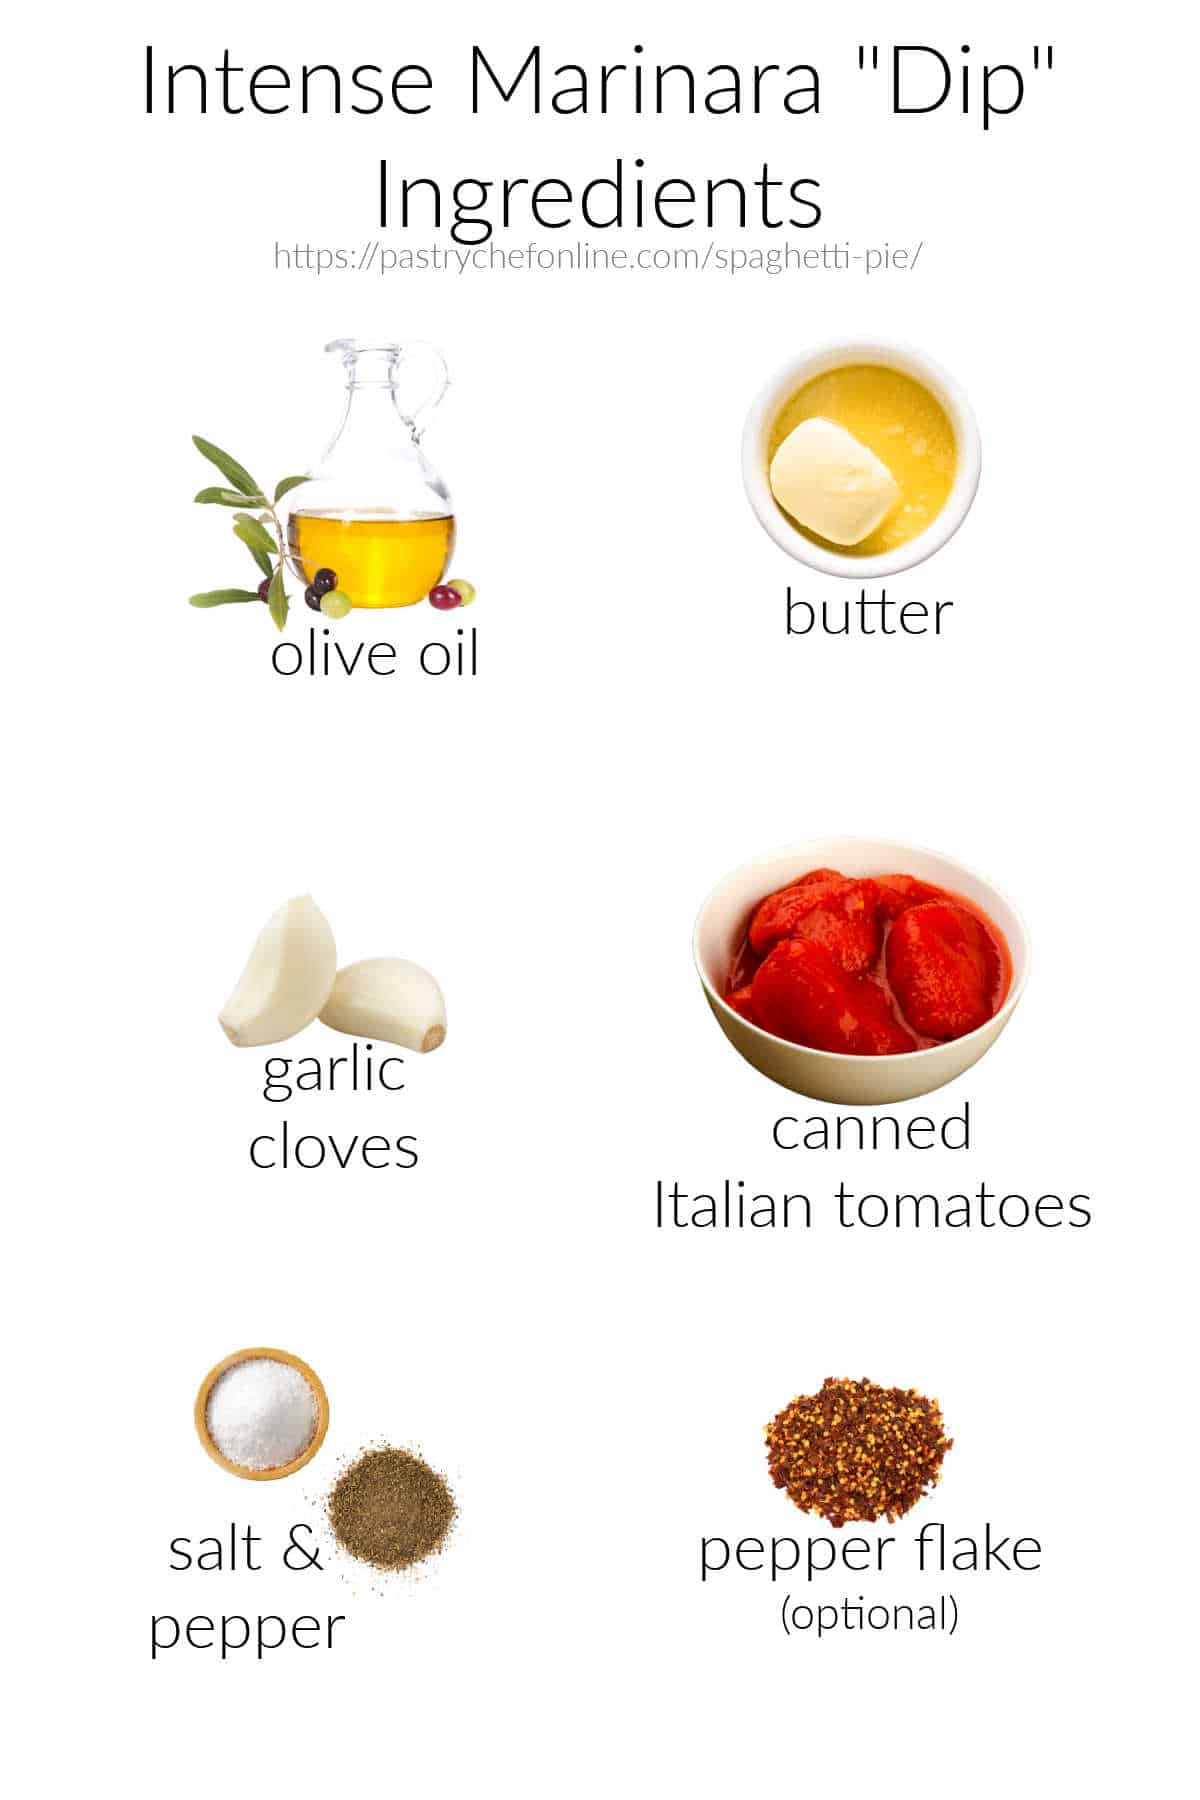 The ingredients for making marinara sauce for bucaitini pie; olive oil, butter, garlic, canned Italian tomatoes, salt & pepper, and pepper flake.